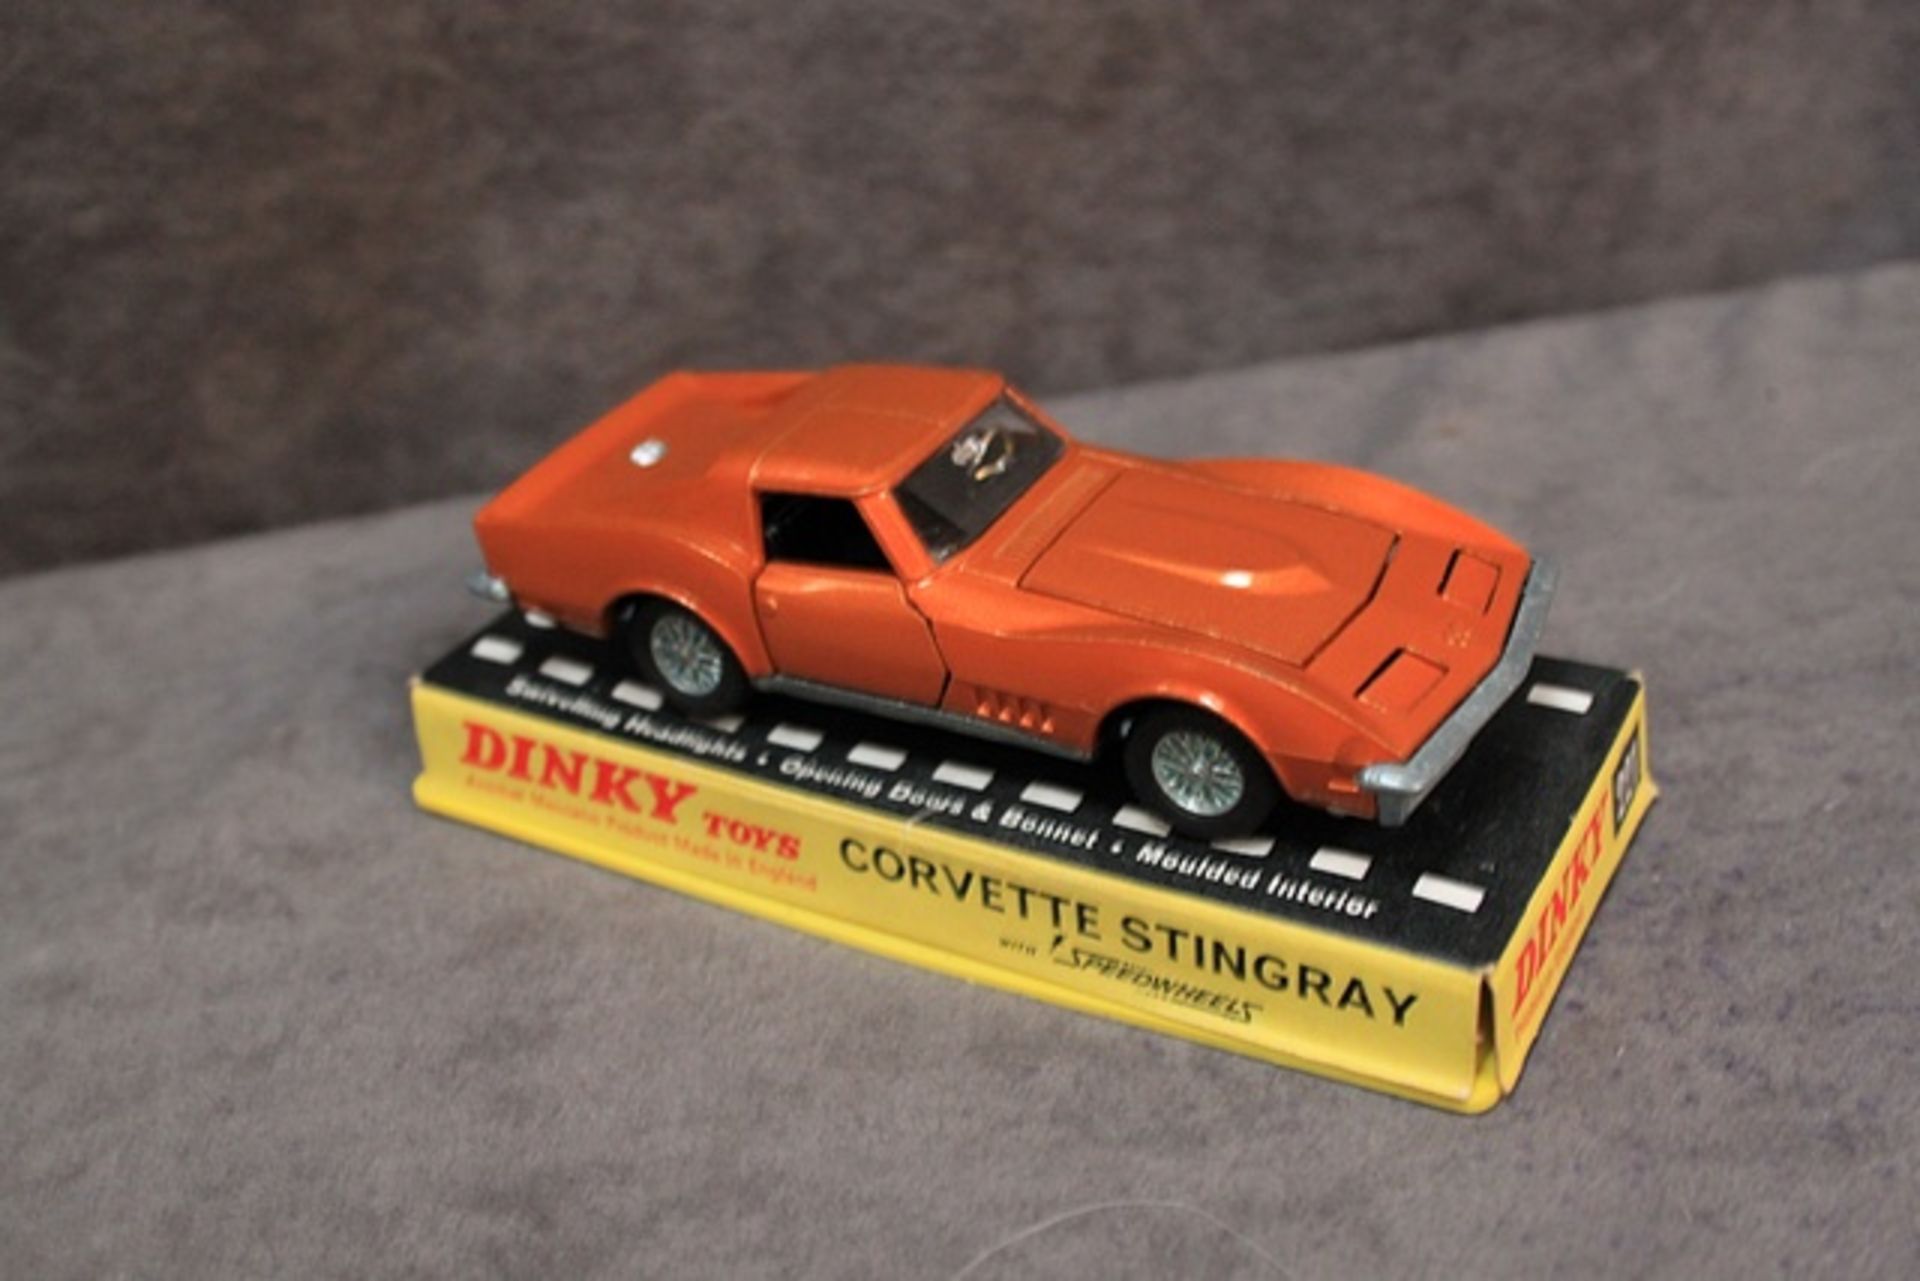 Mint Dinky Toys diecast #221 Corvette Stingray with painted headlights in excellent display box - - Image 2 of 3